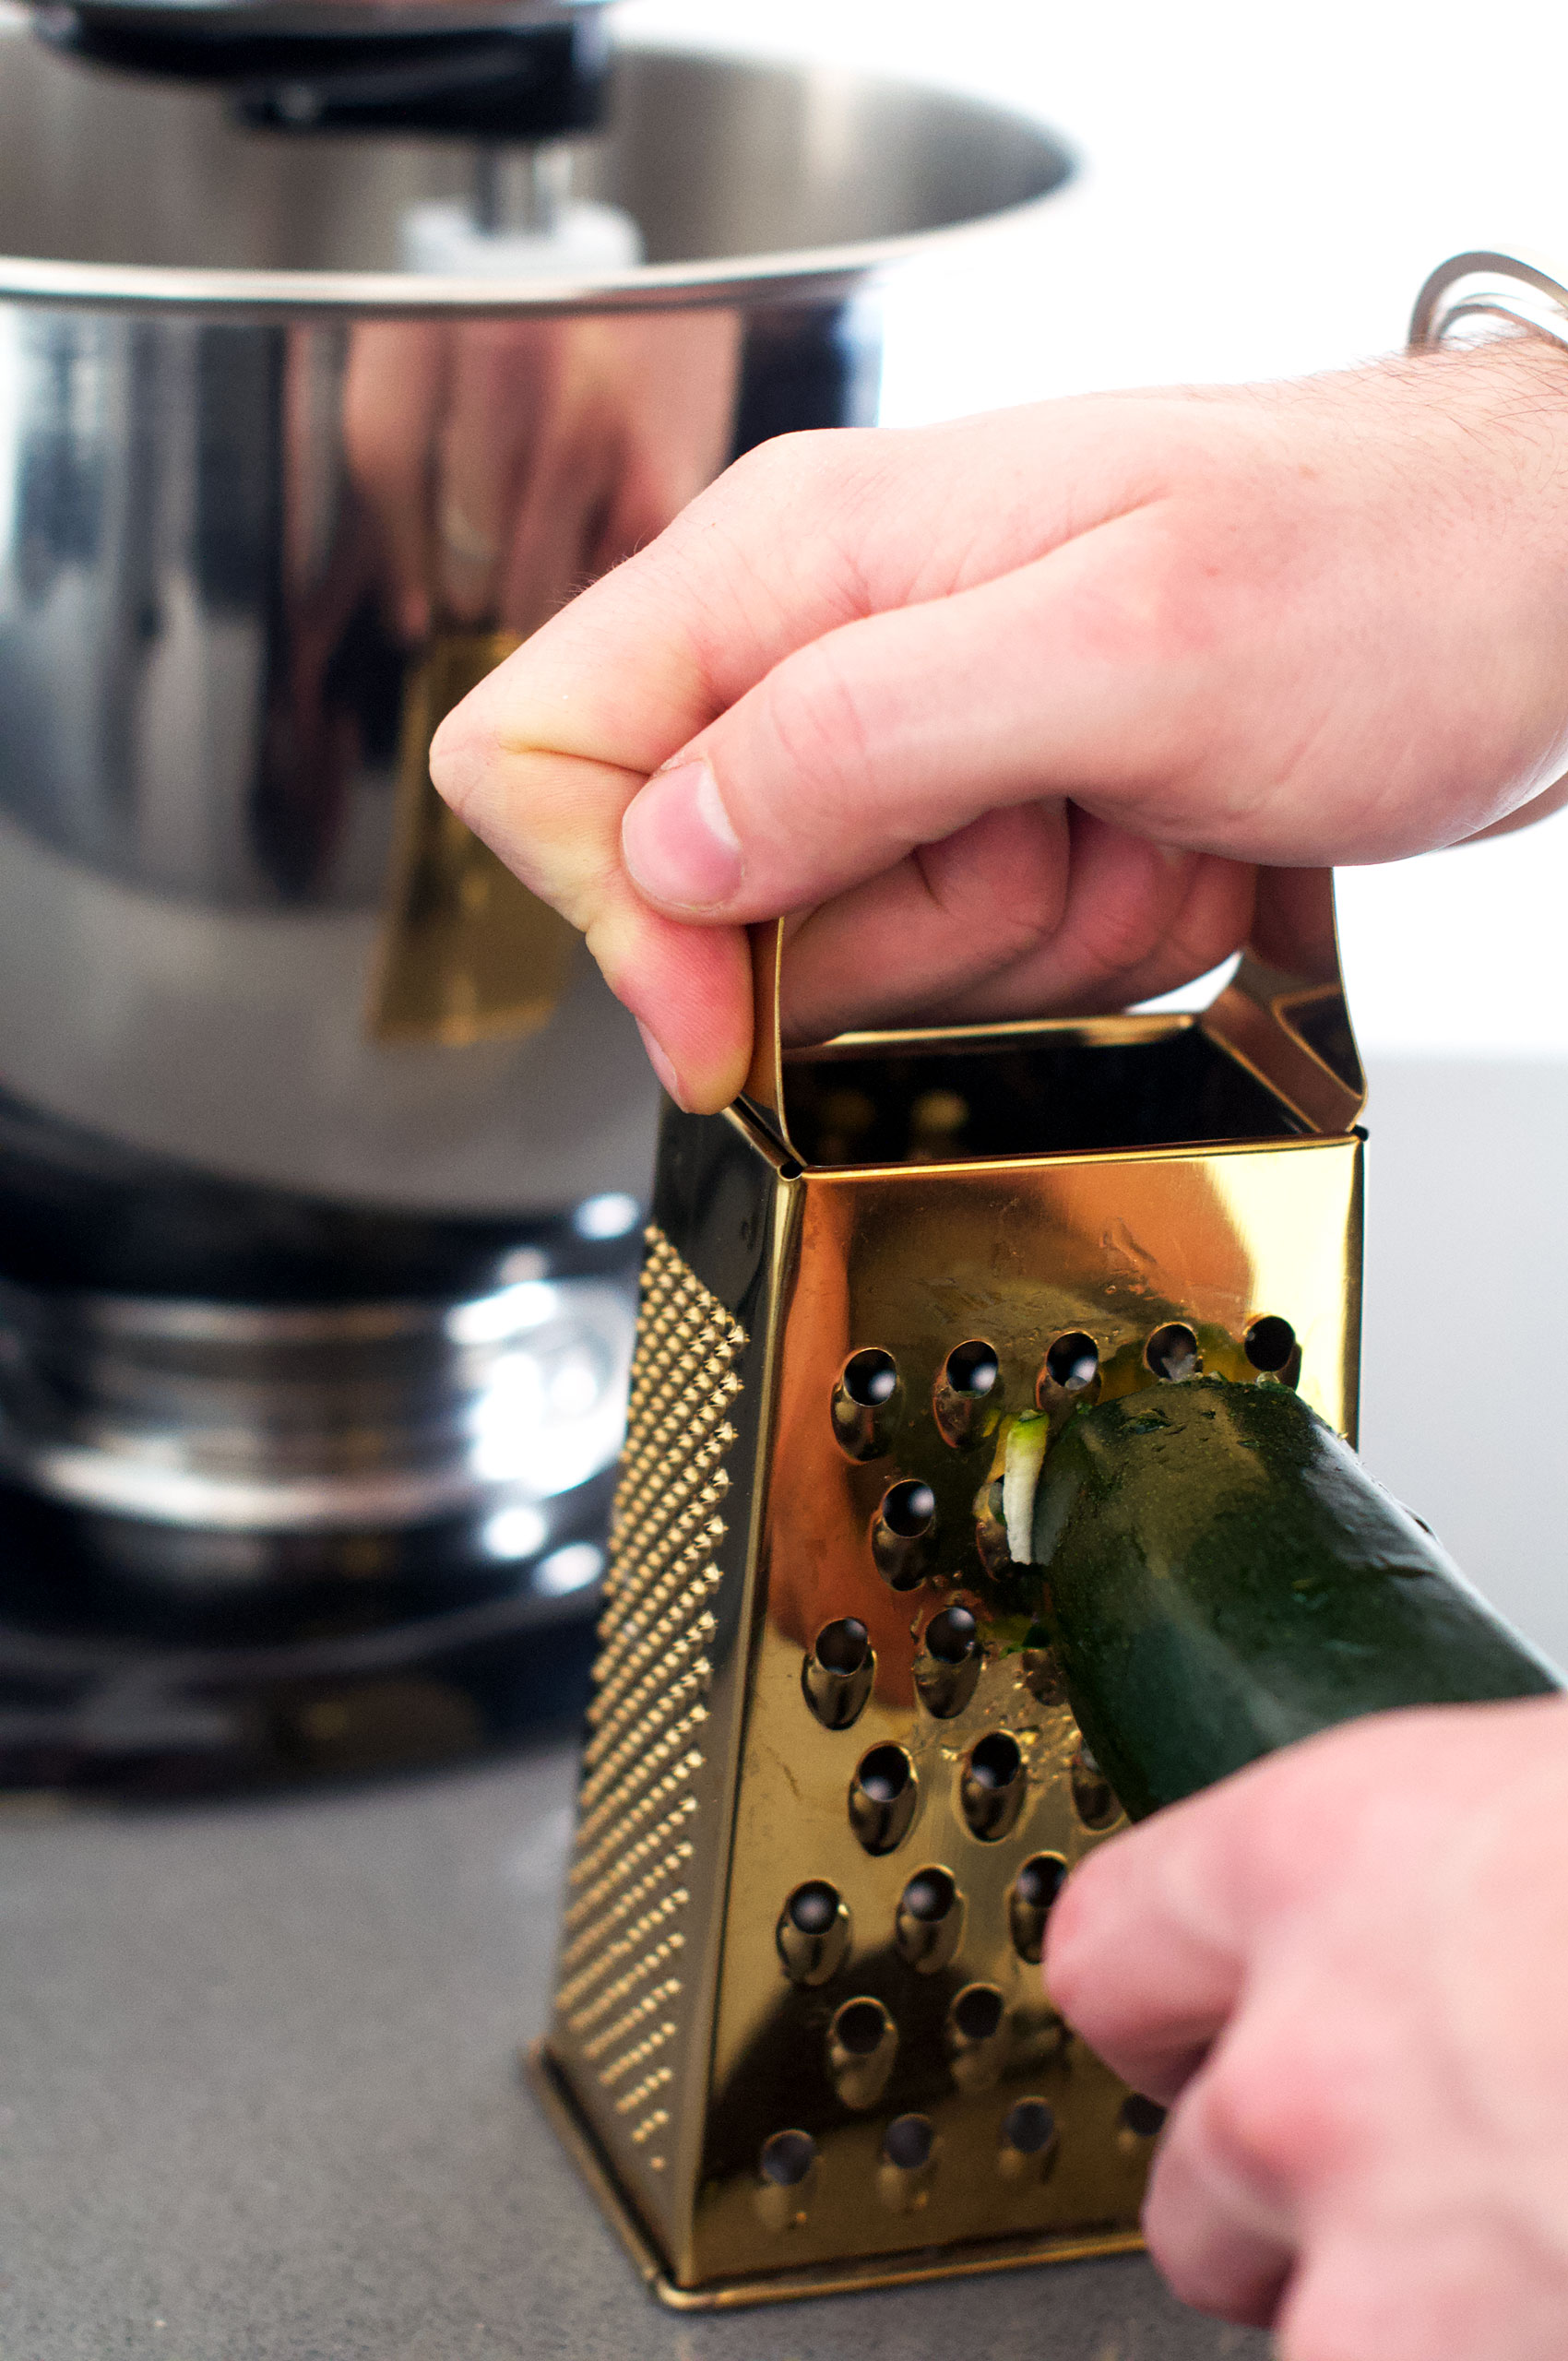 Grating courgette using a golden four-sided box grater